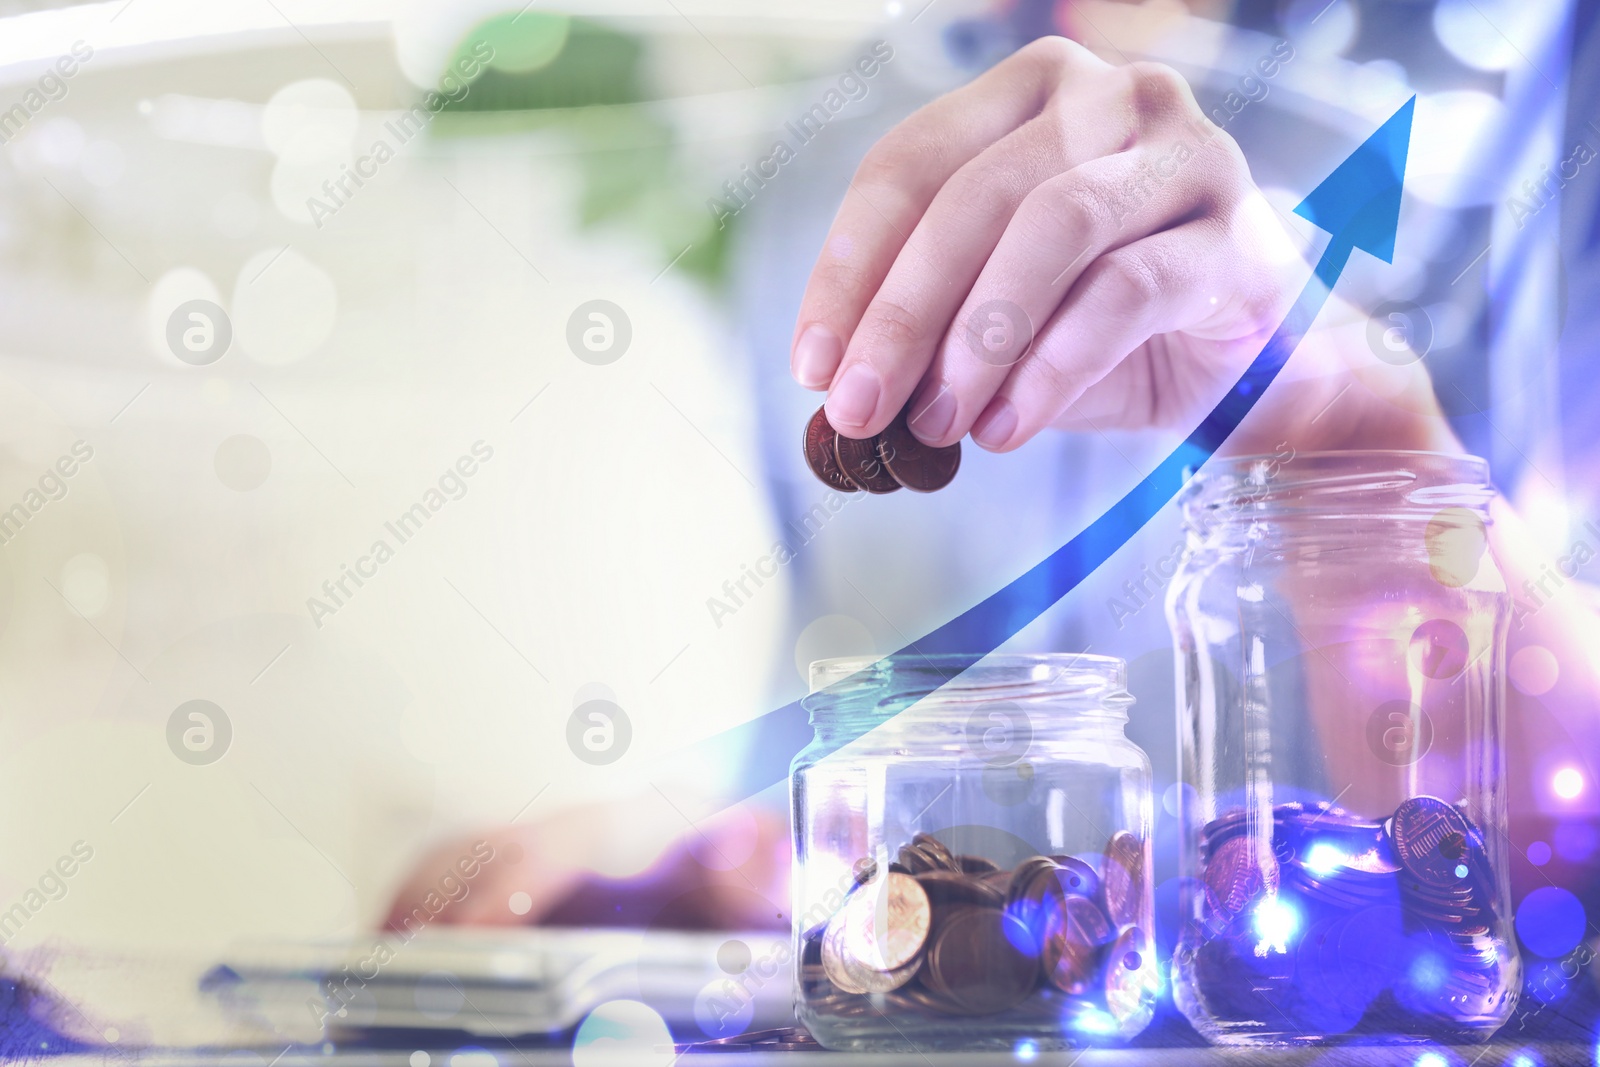 Image of Woman putting money into glass jar at table, closeup